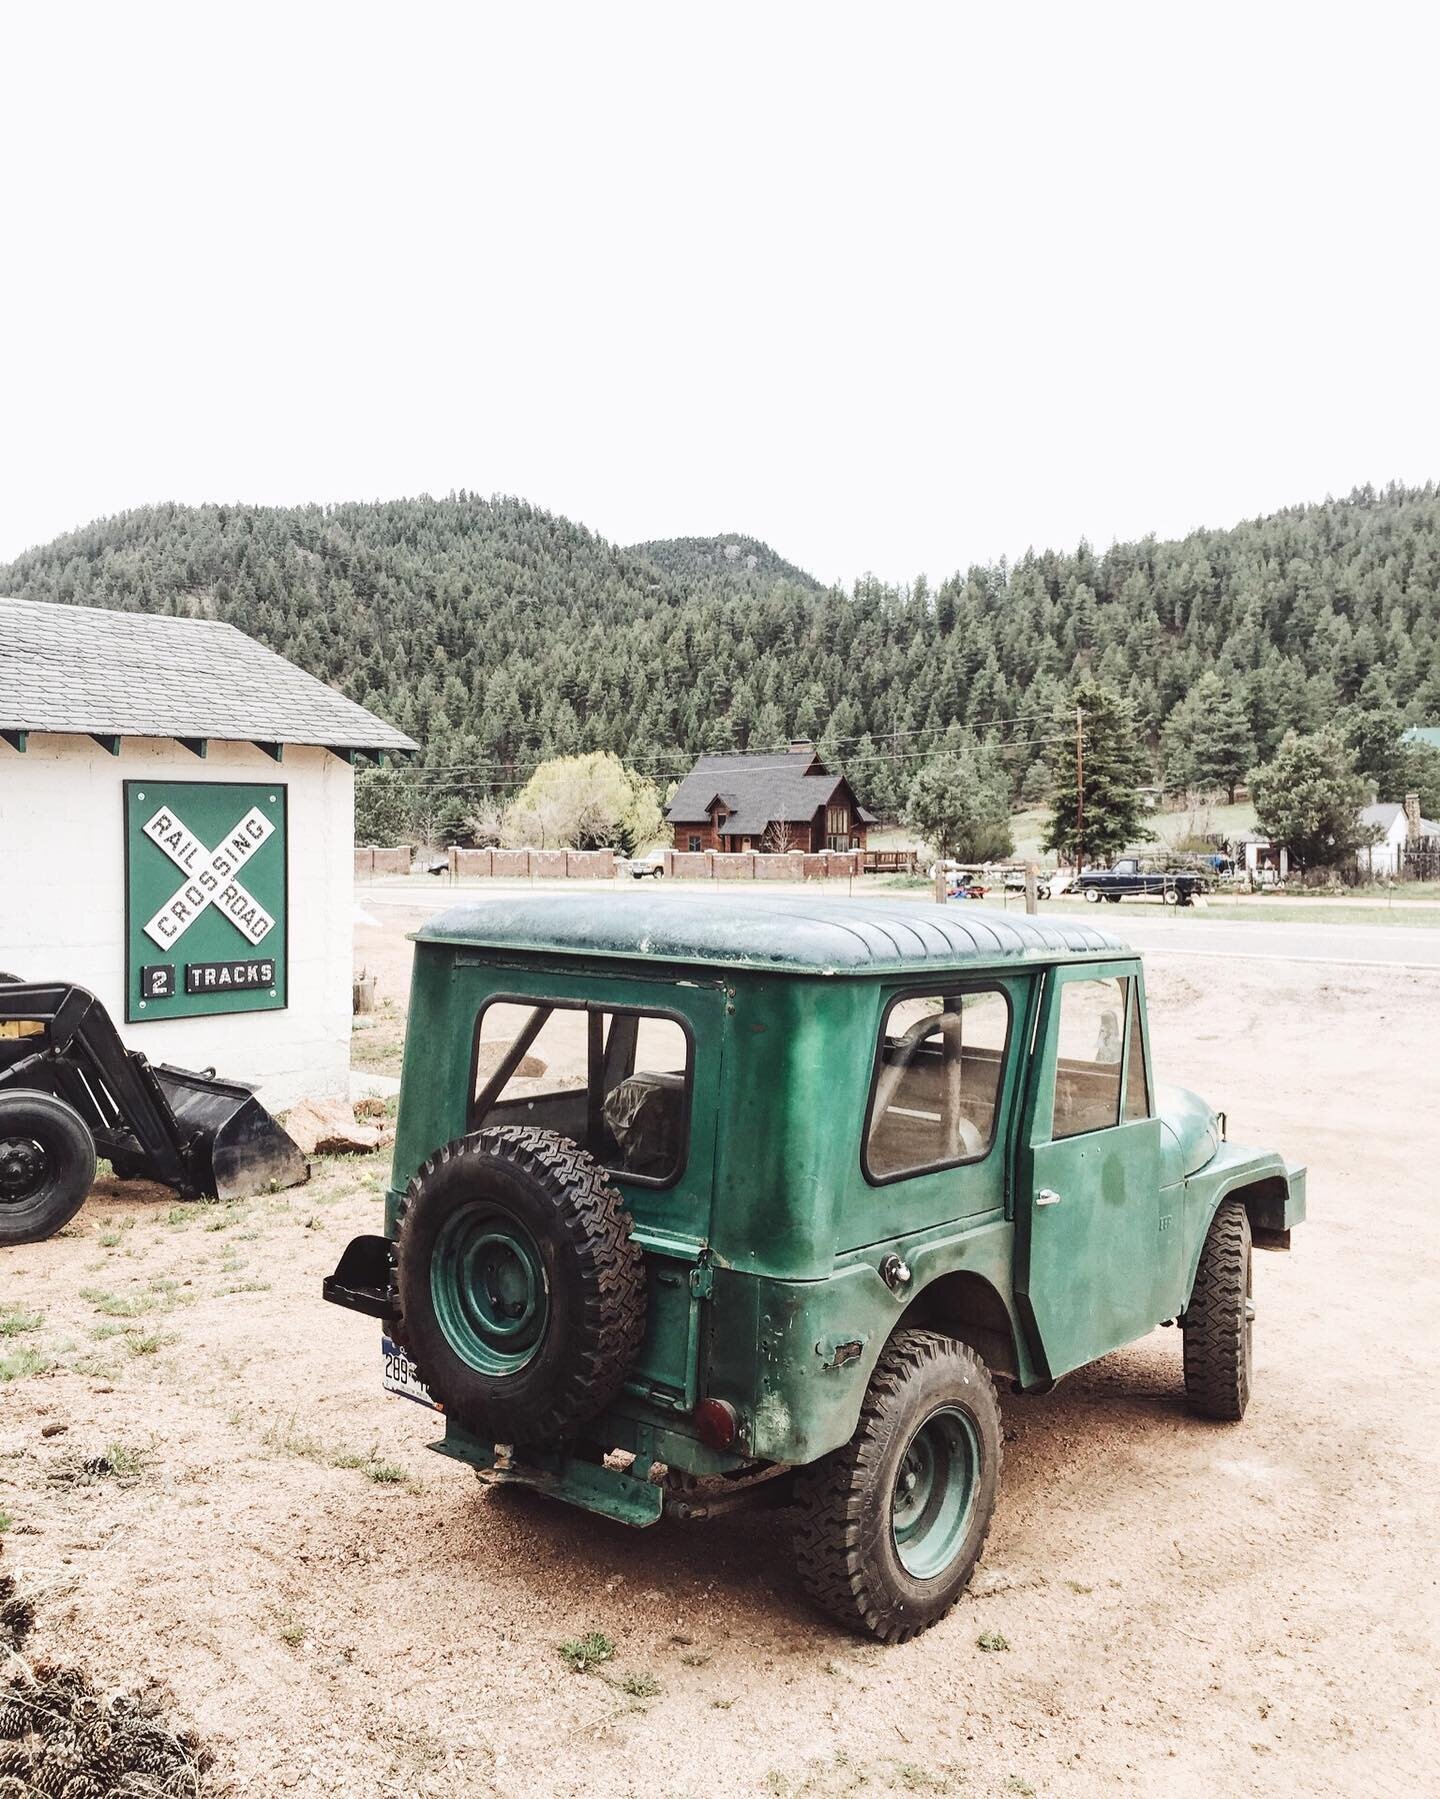 Hard to tell exact year of this beast but I&rsquo;m thinking early 60s, manufactured at some point beyond the flat fender #Jeep days. Heavy mods, mostly DIY, but very cool. 🤙

Pine, Colorado. Jefferson County.